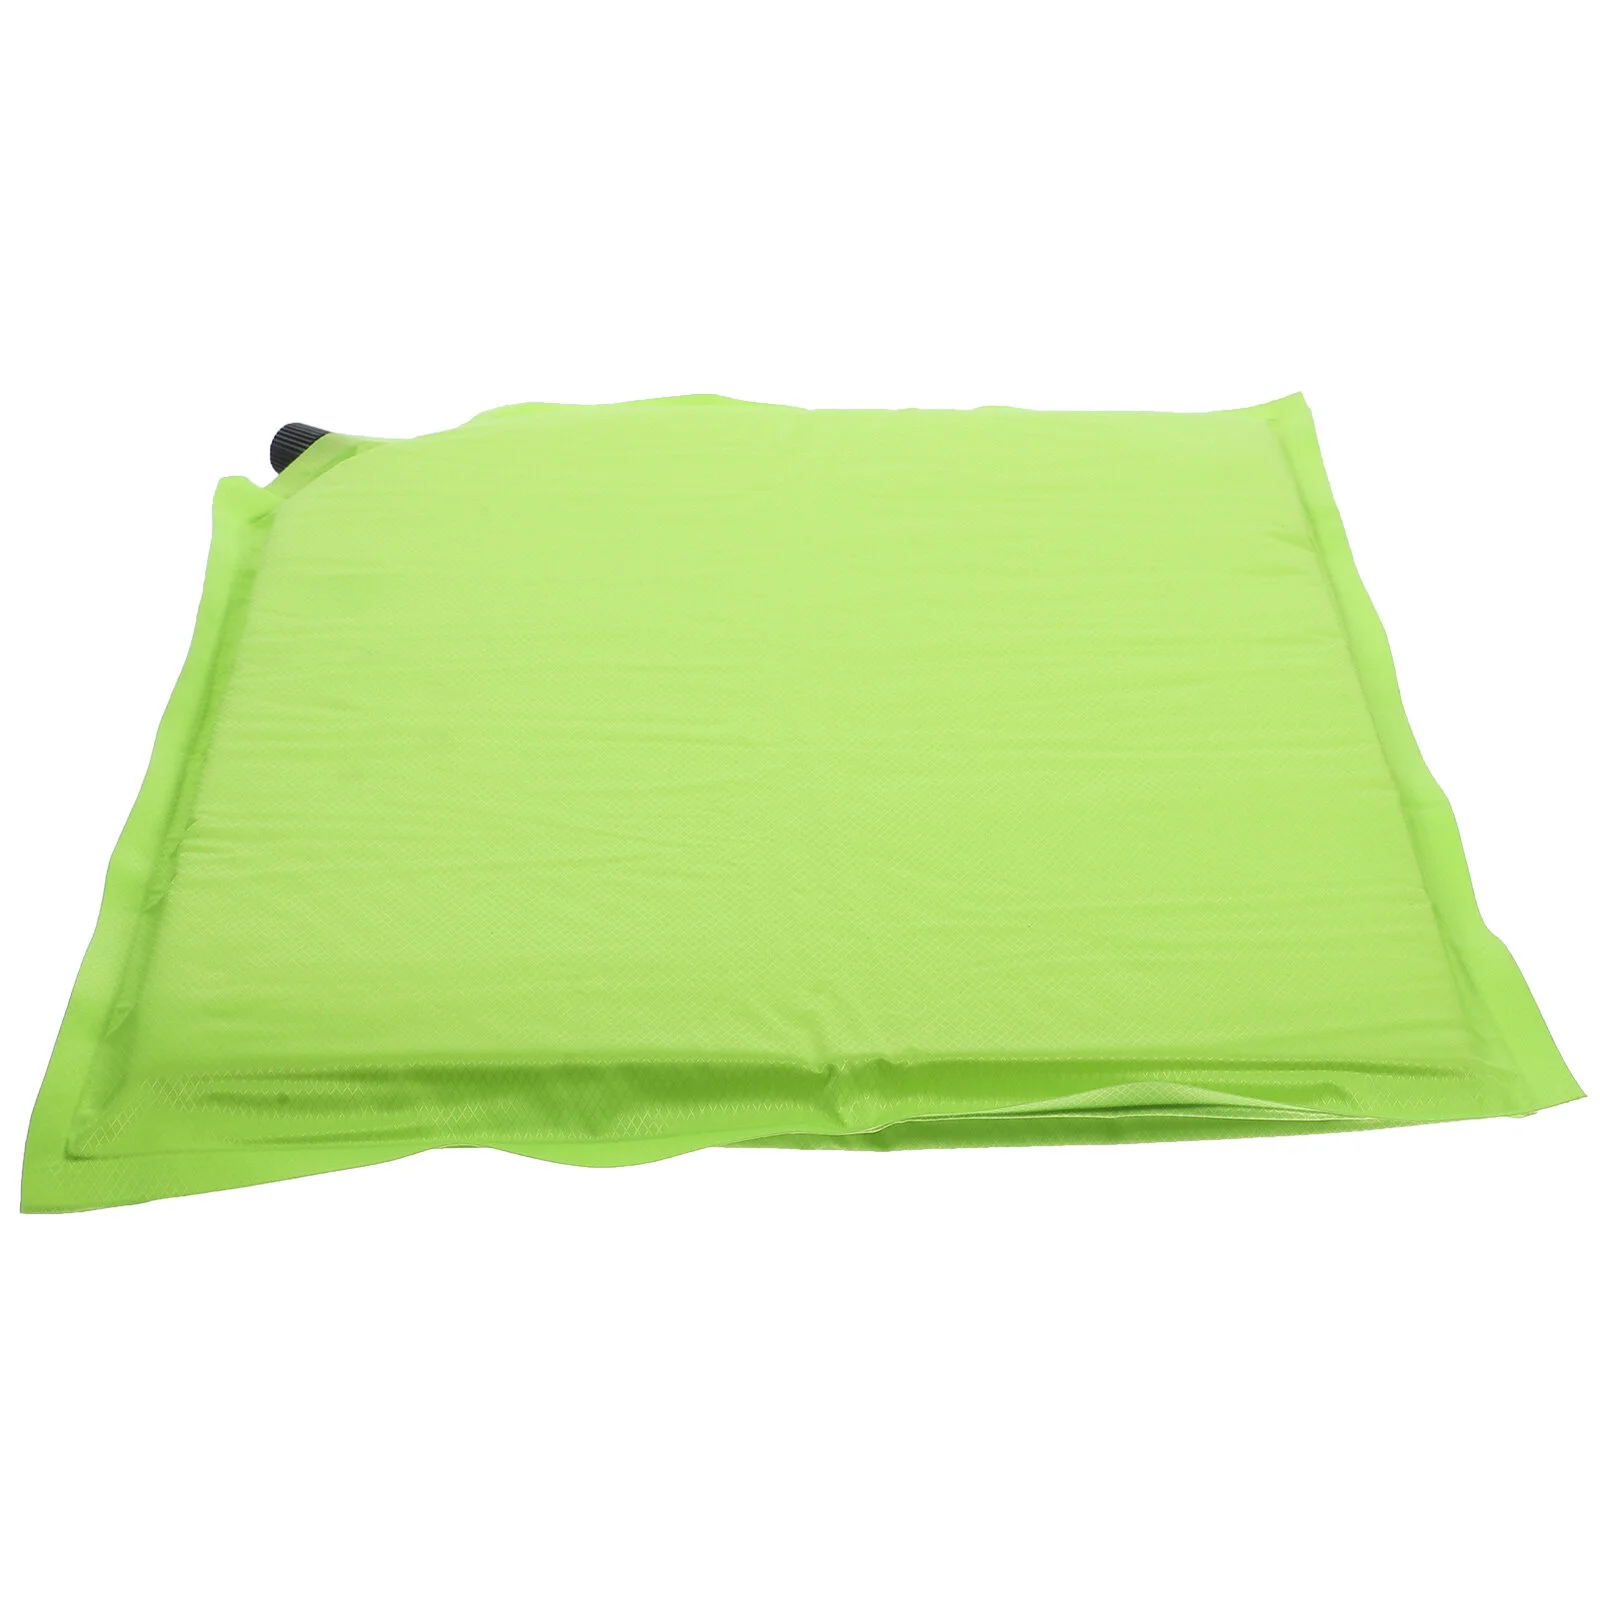 https://ae01.alicdn.com/kf/Sc029dce3636c47e9b59a4f911ad89b13z/Self-inflating-Cushion-Wide-Stadium-Seat-Inflatable-Car-Cushions-Camping-Plane-Travel-Widen-Bench-Seats-Hiking.jpg